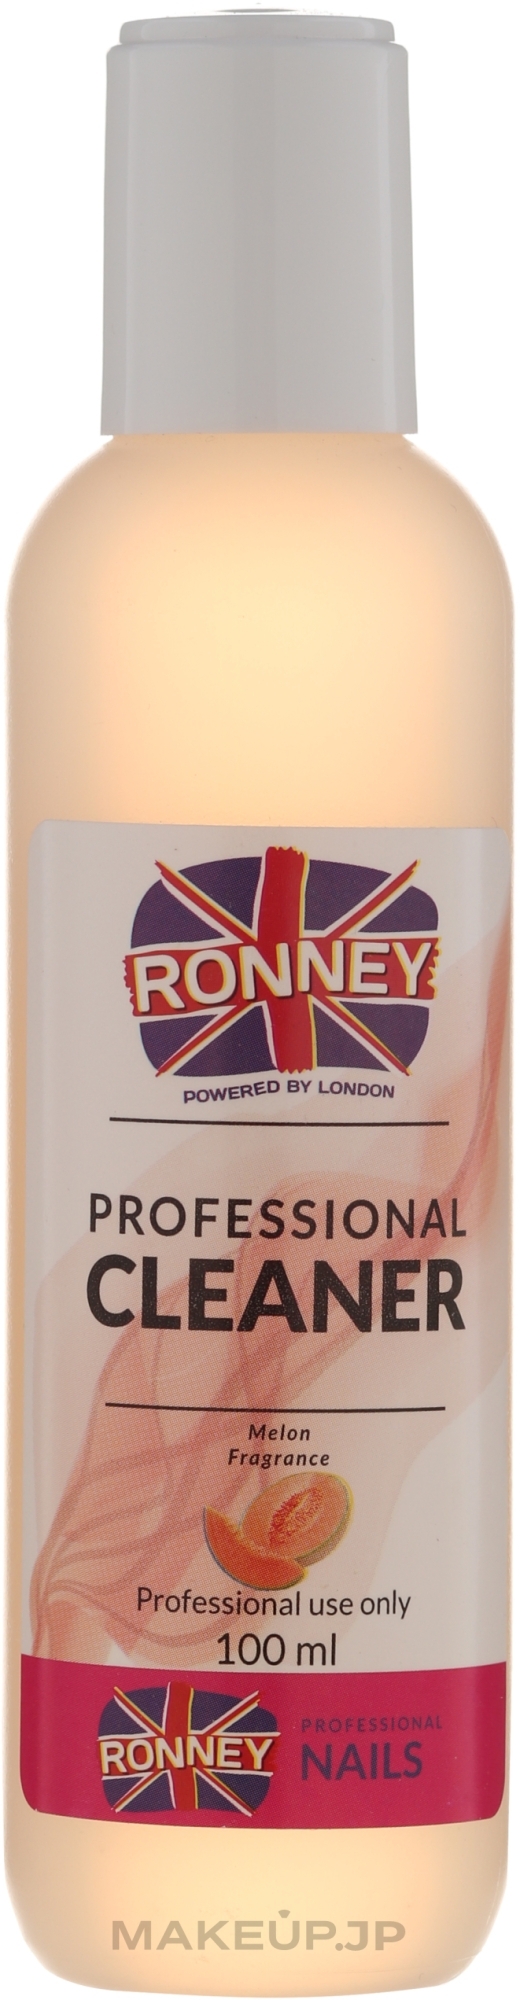 Nail Degreaser ‘Melon’ - Ronney Professional Nail Cleaner Melon — photo 100 ml